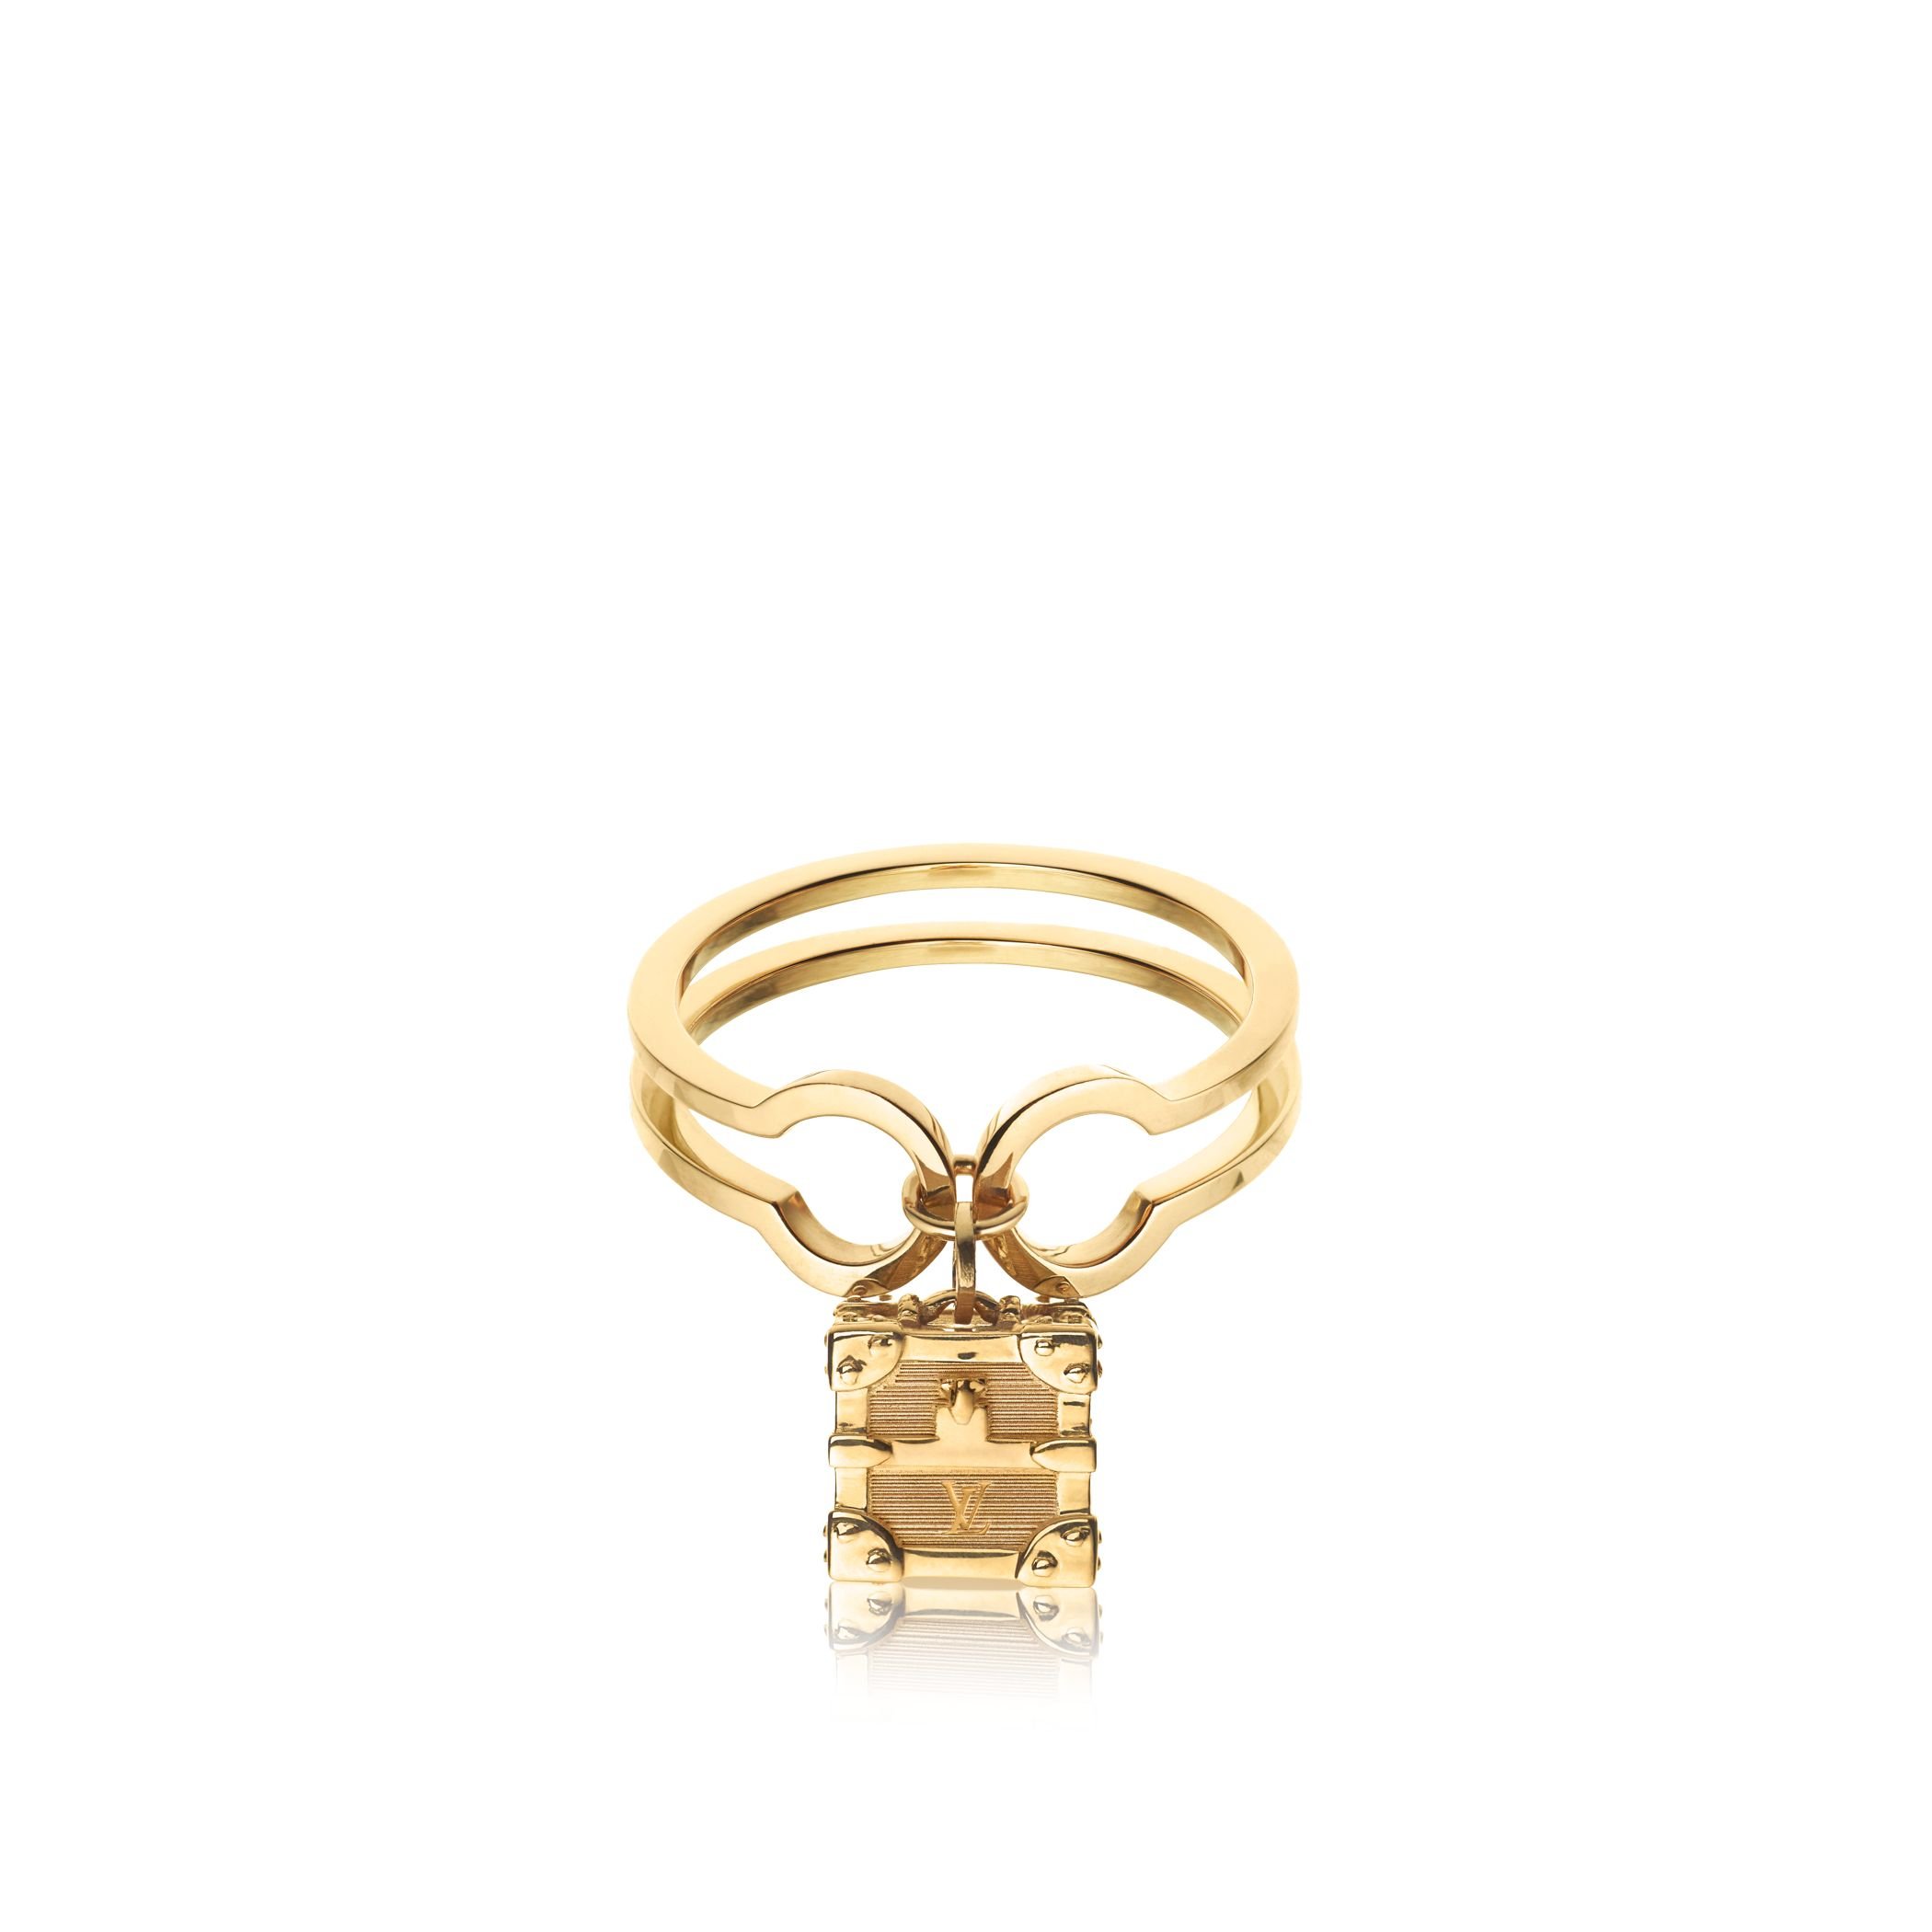 Louis Vuitton Petite Malle Ring in Gold | Lyst